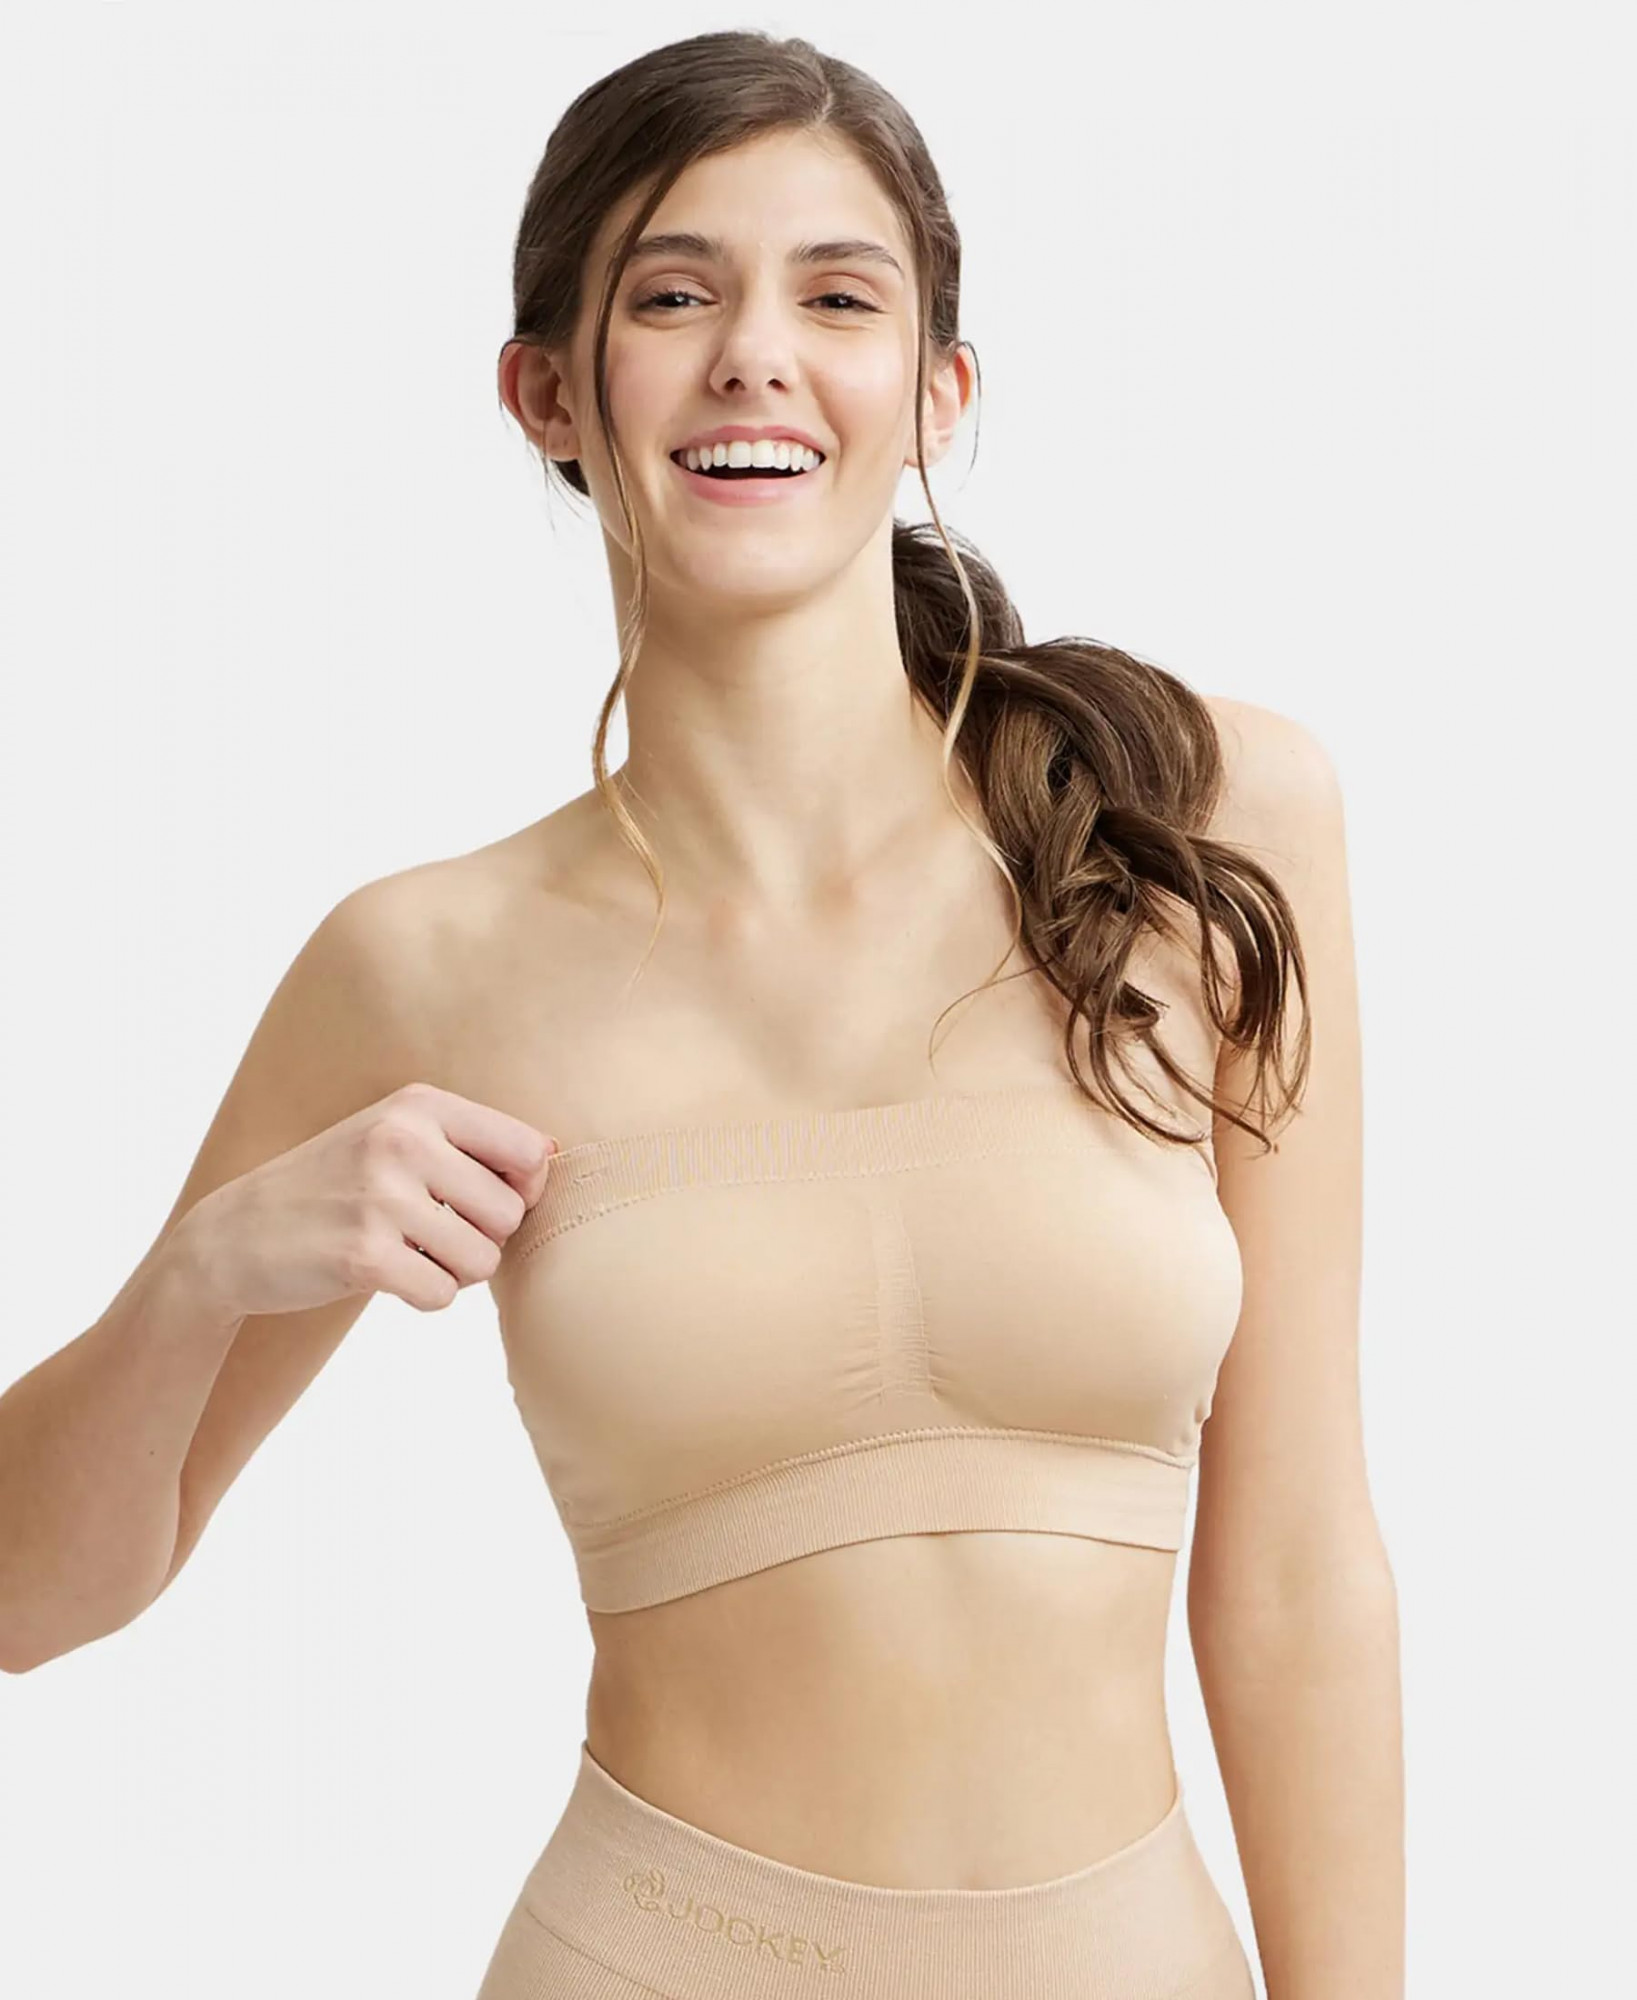 Buy Amante Wirefree Full Coverage Cotton Sports Bra at